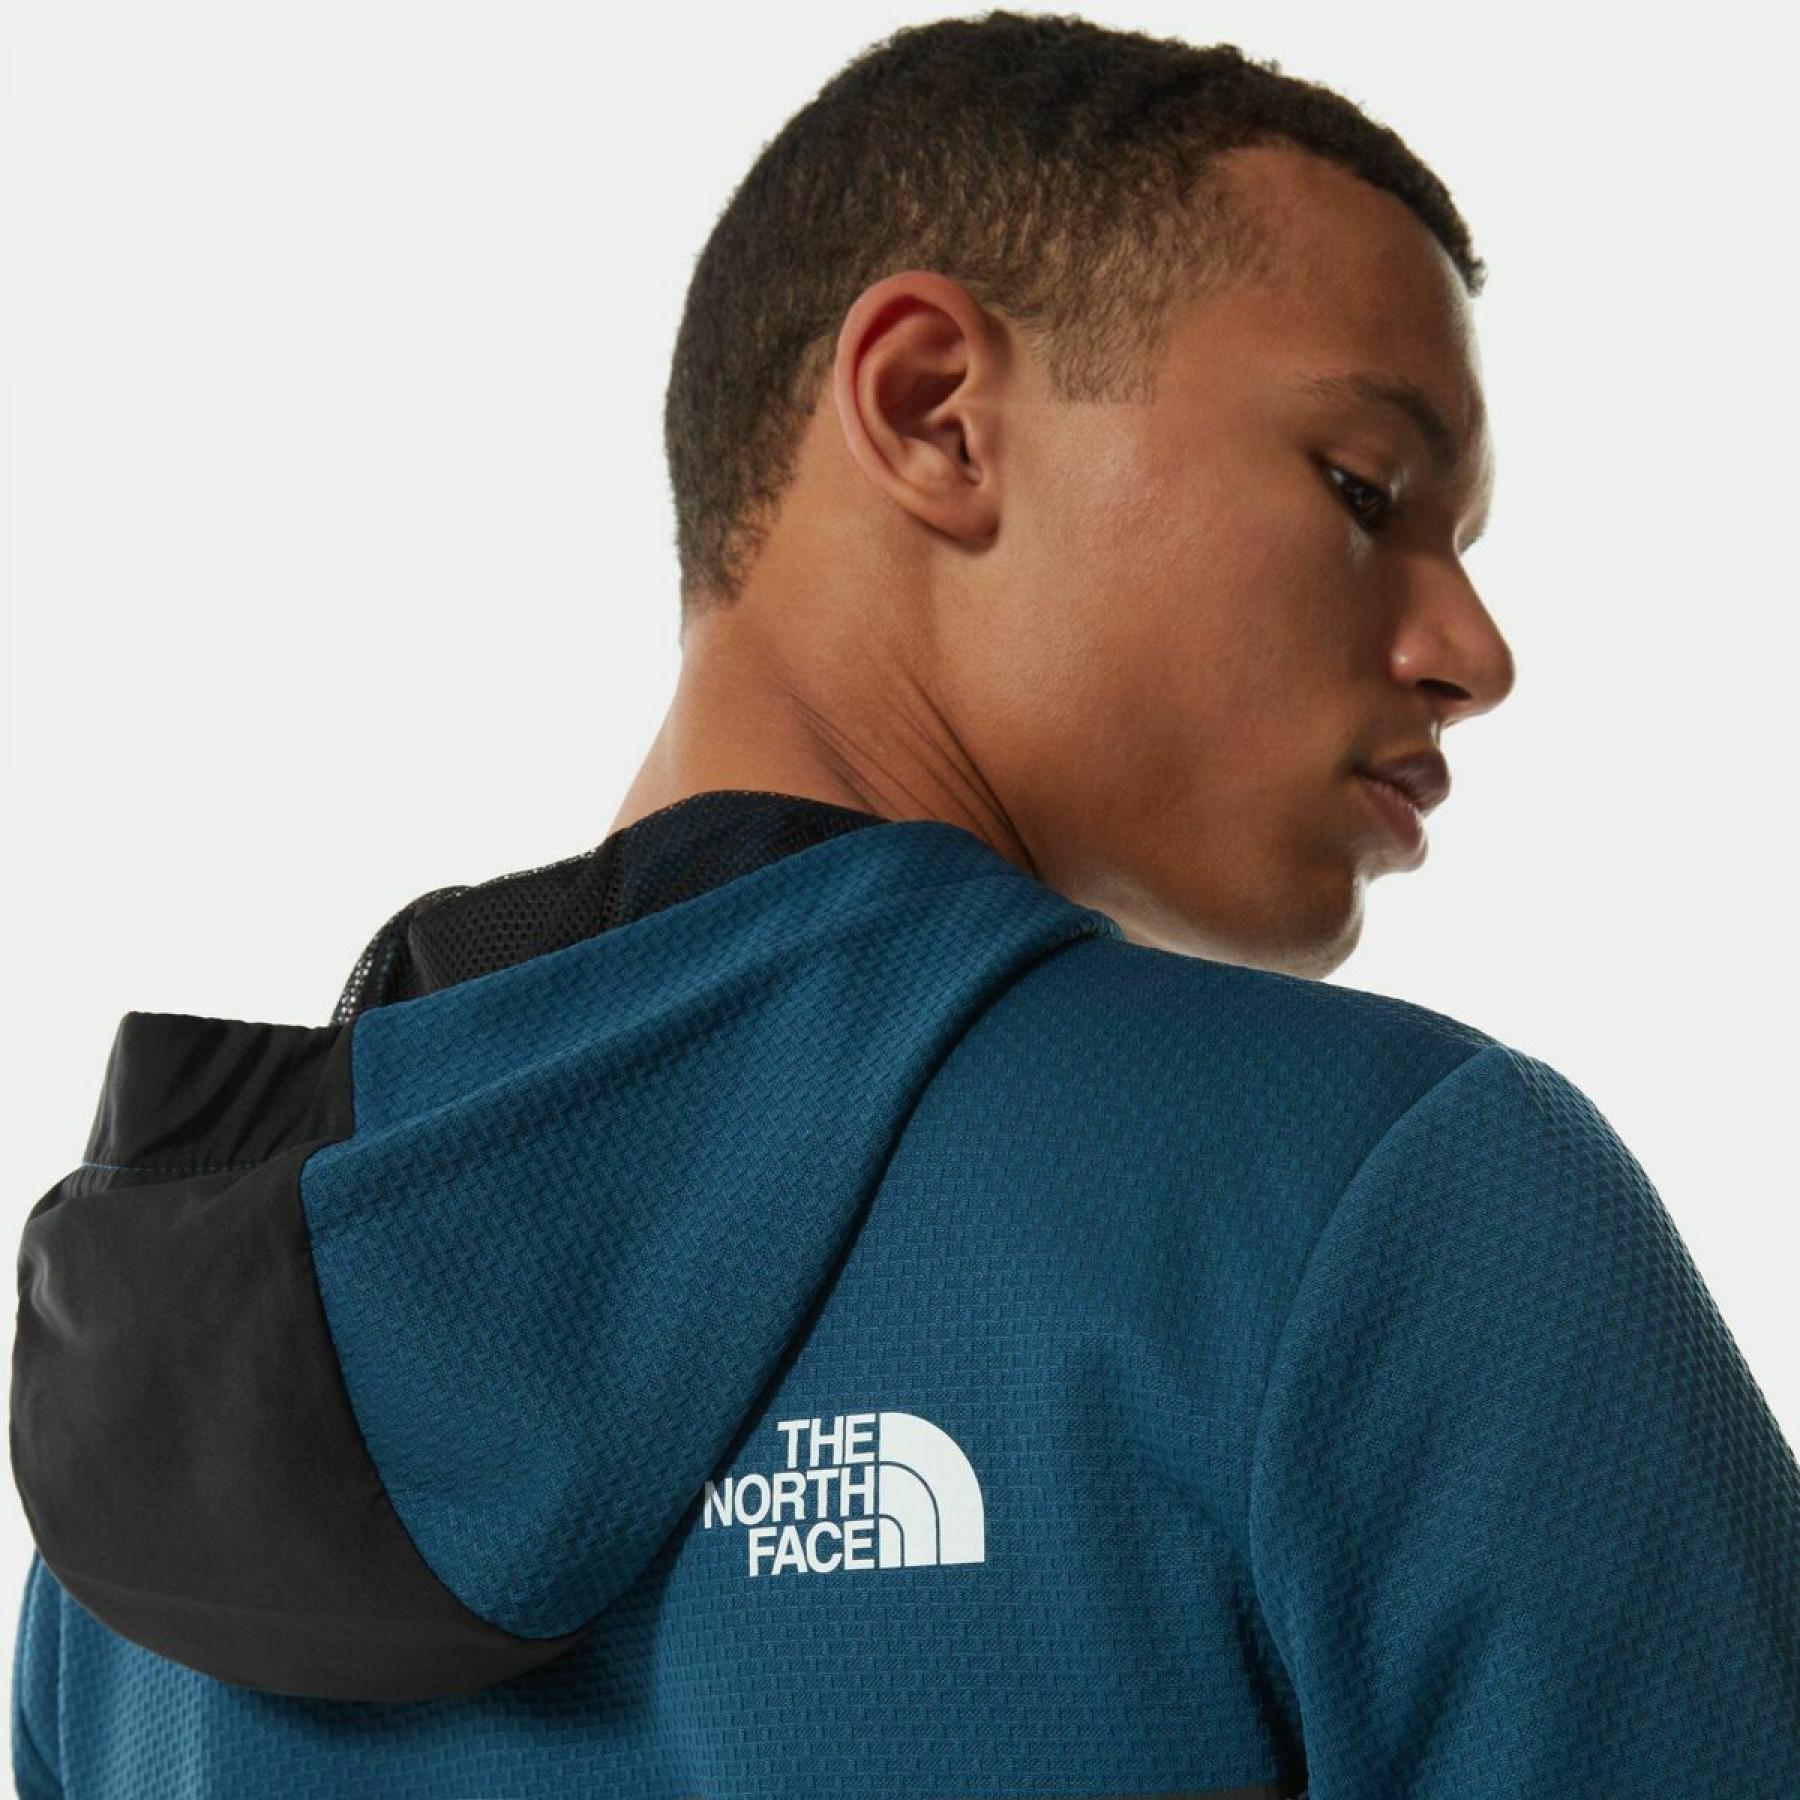 Chaqueta The North Face Overlay